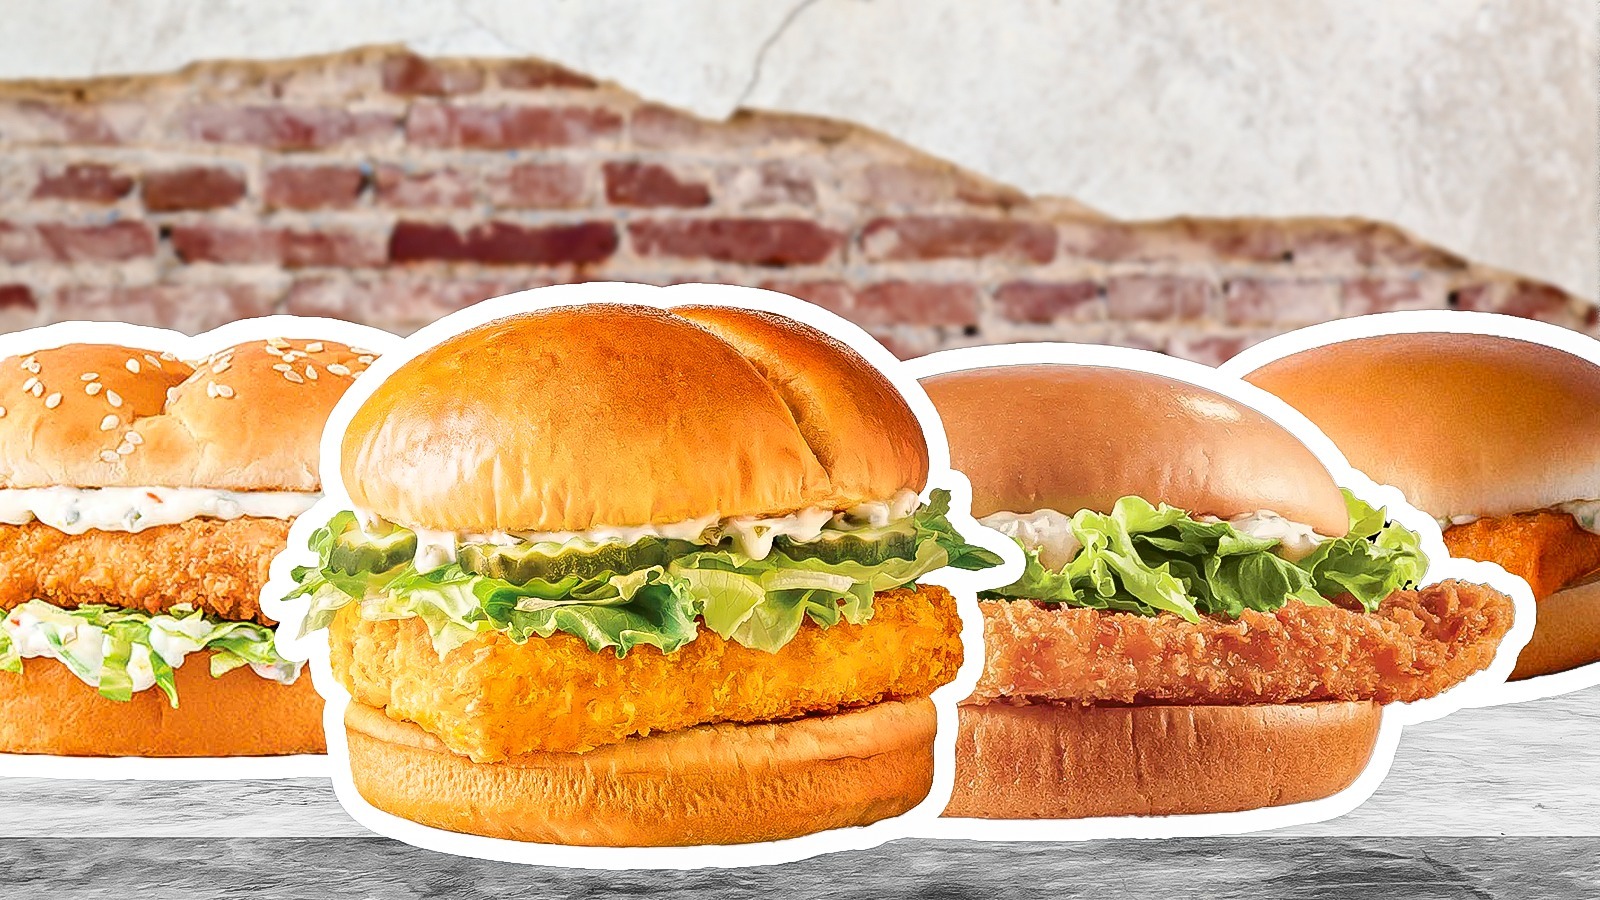 Fast Food Fish Sandwiches That Deserve A Permanent Spot On The Menu